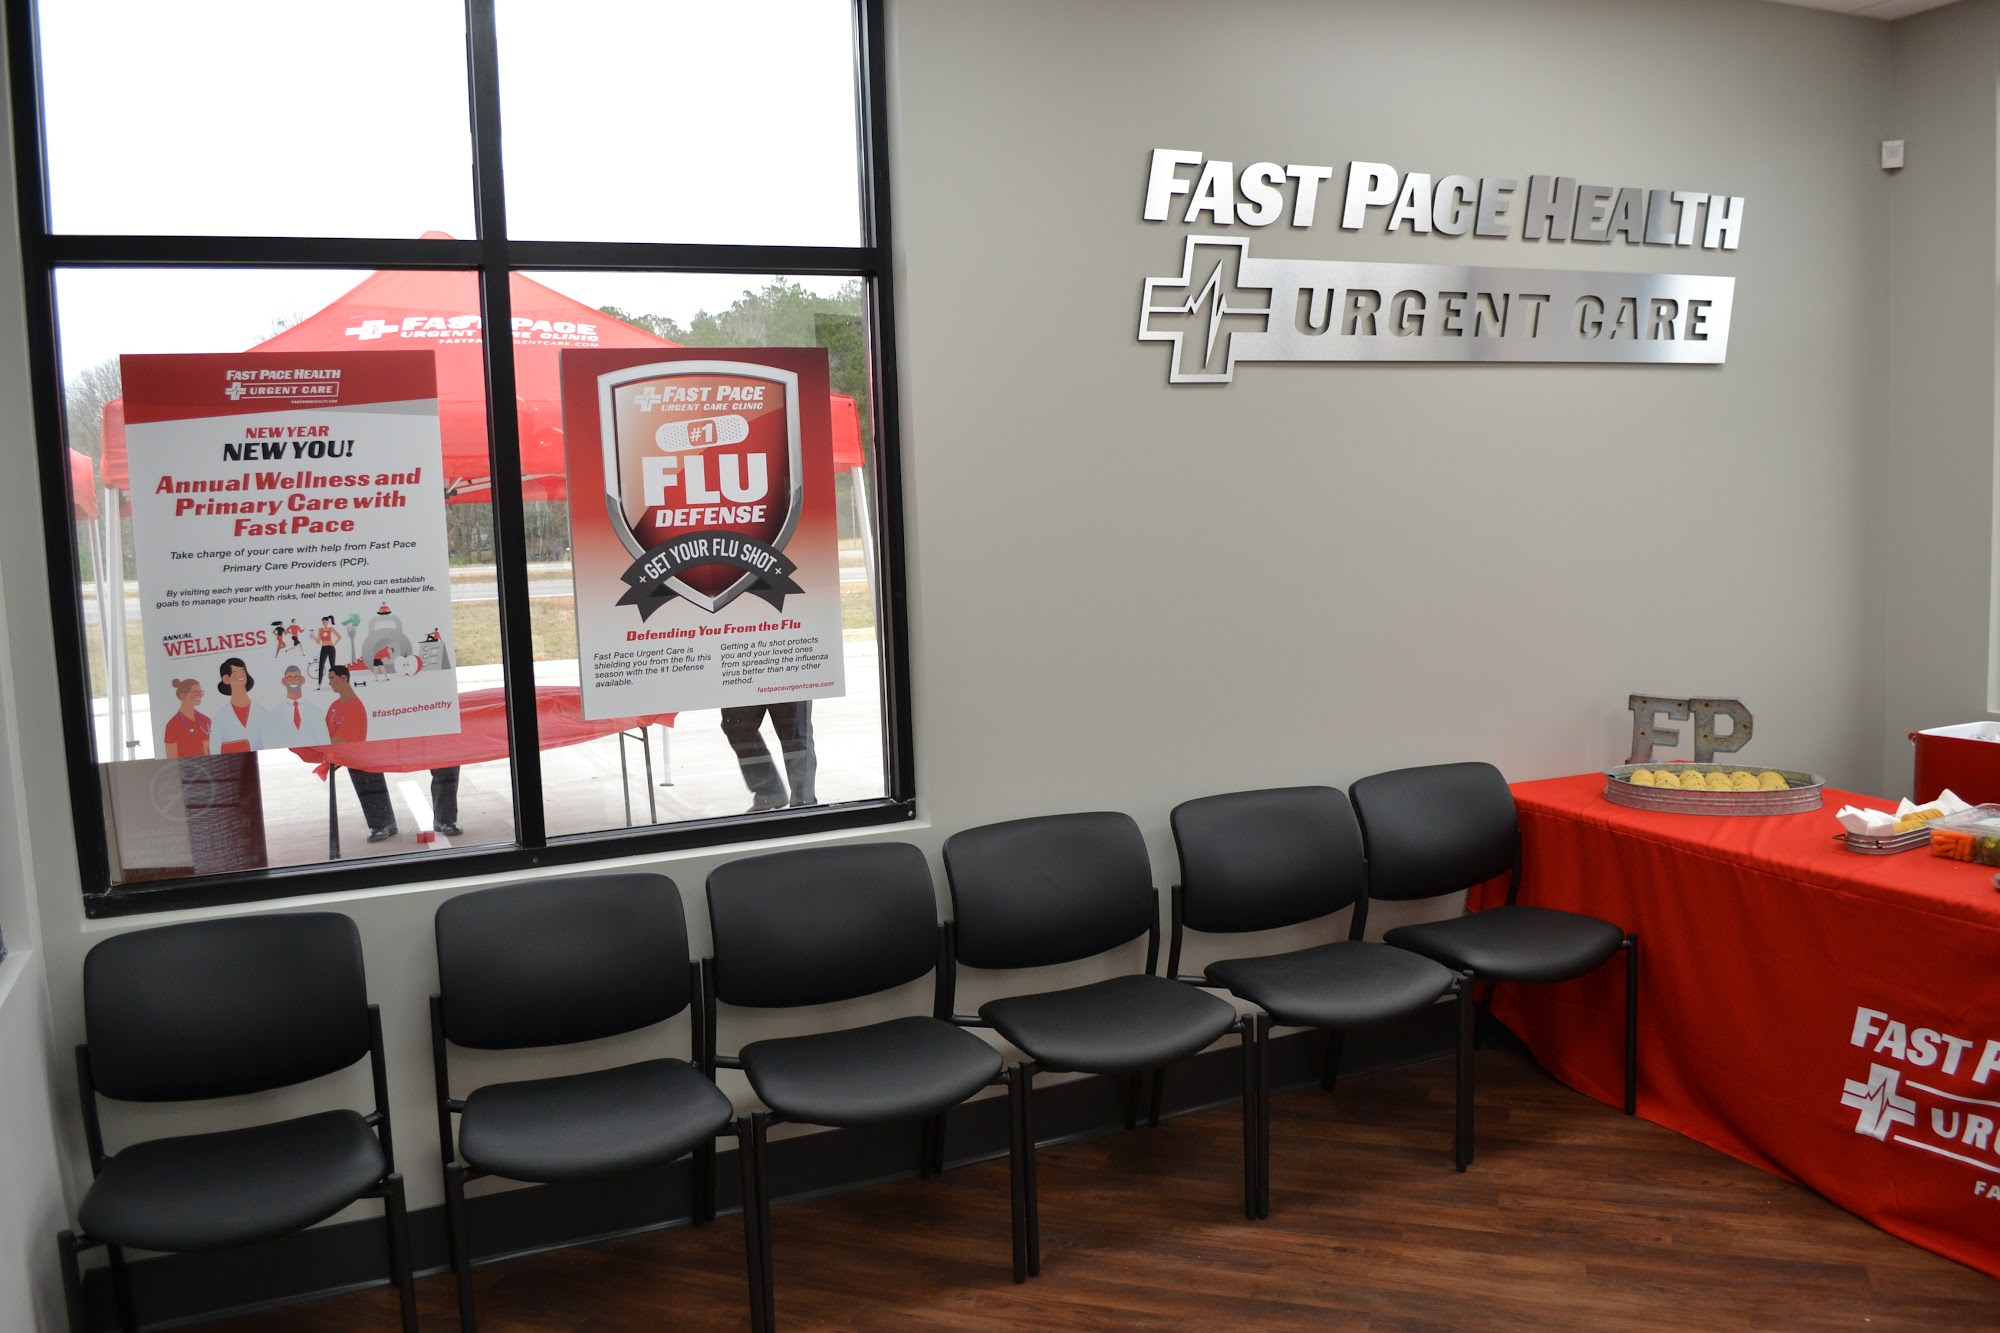 Fast Pace Health Urgent Care - Waverly, TN 301 W Main St, Waverly Tennessee 37185